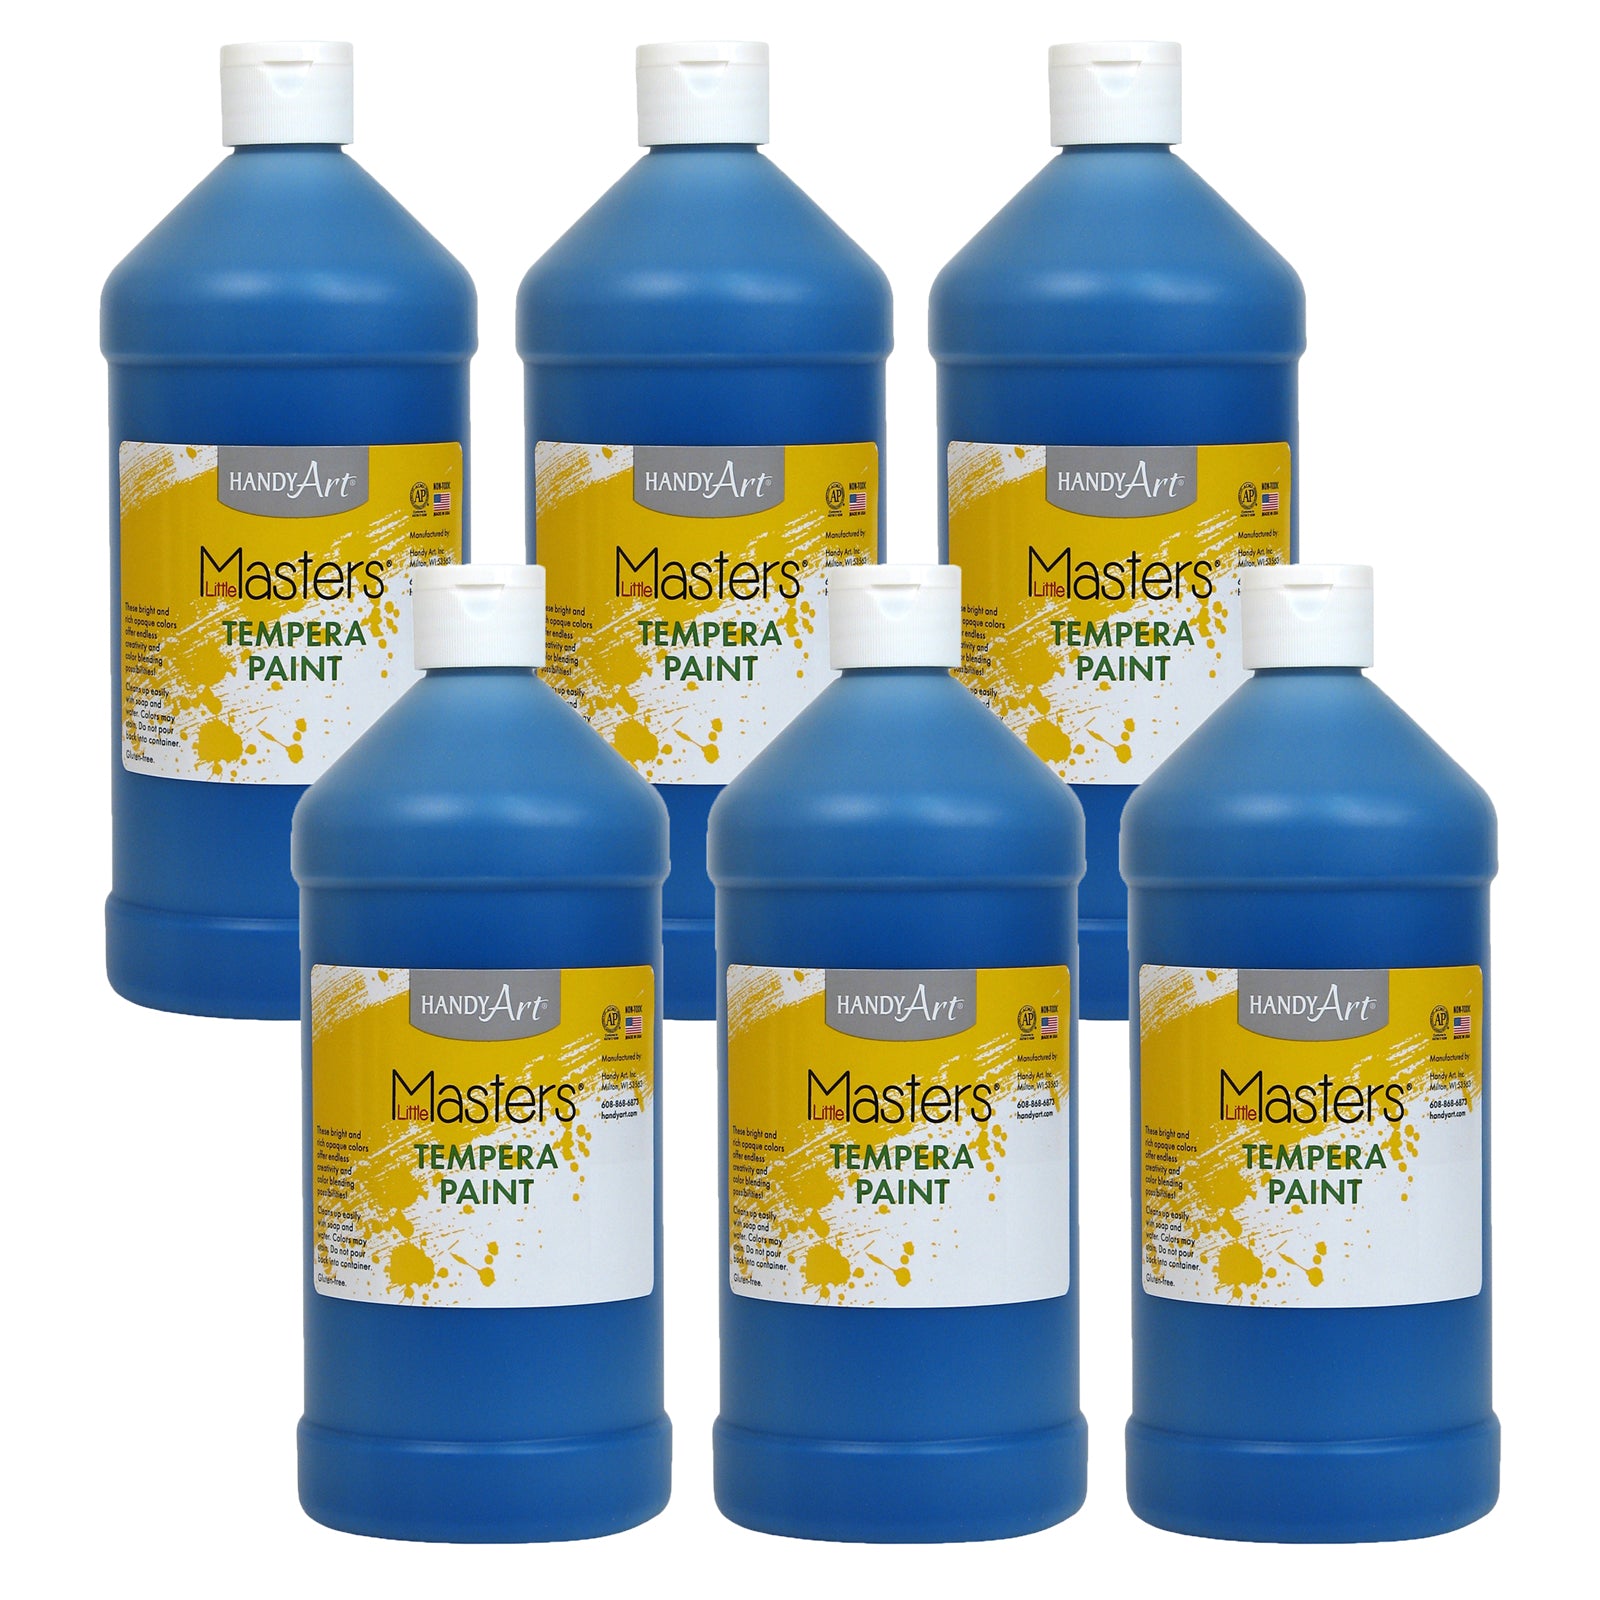 Little Masters® Tempera Paint, Blue, 32 oz., Pack of 6 - A1 School Supplies